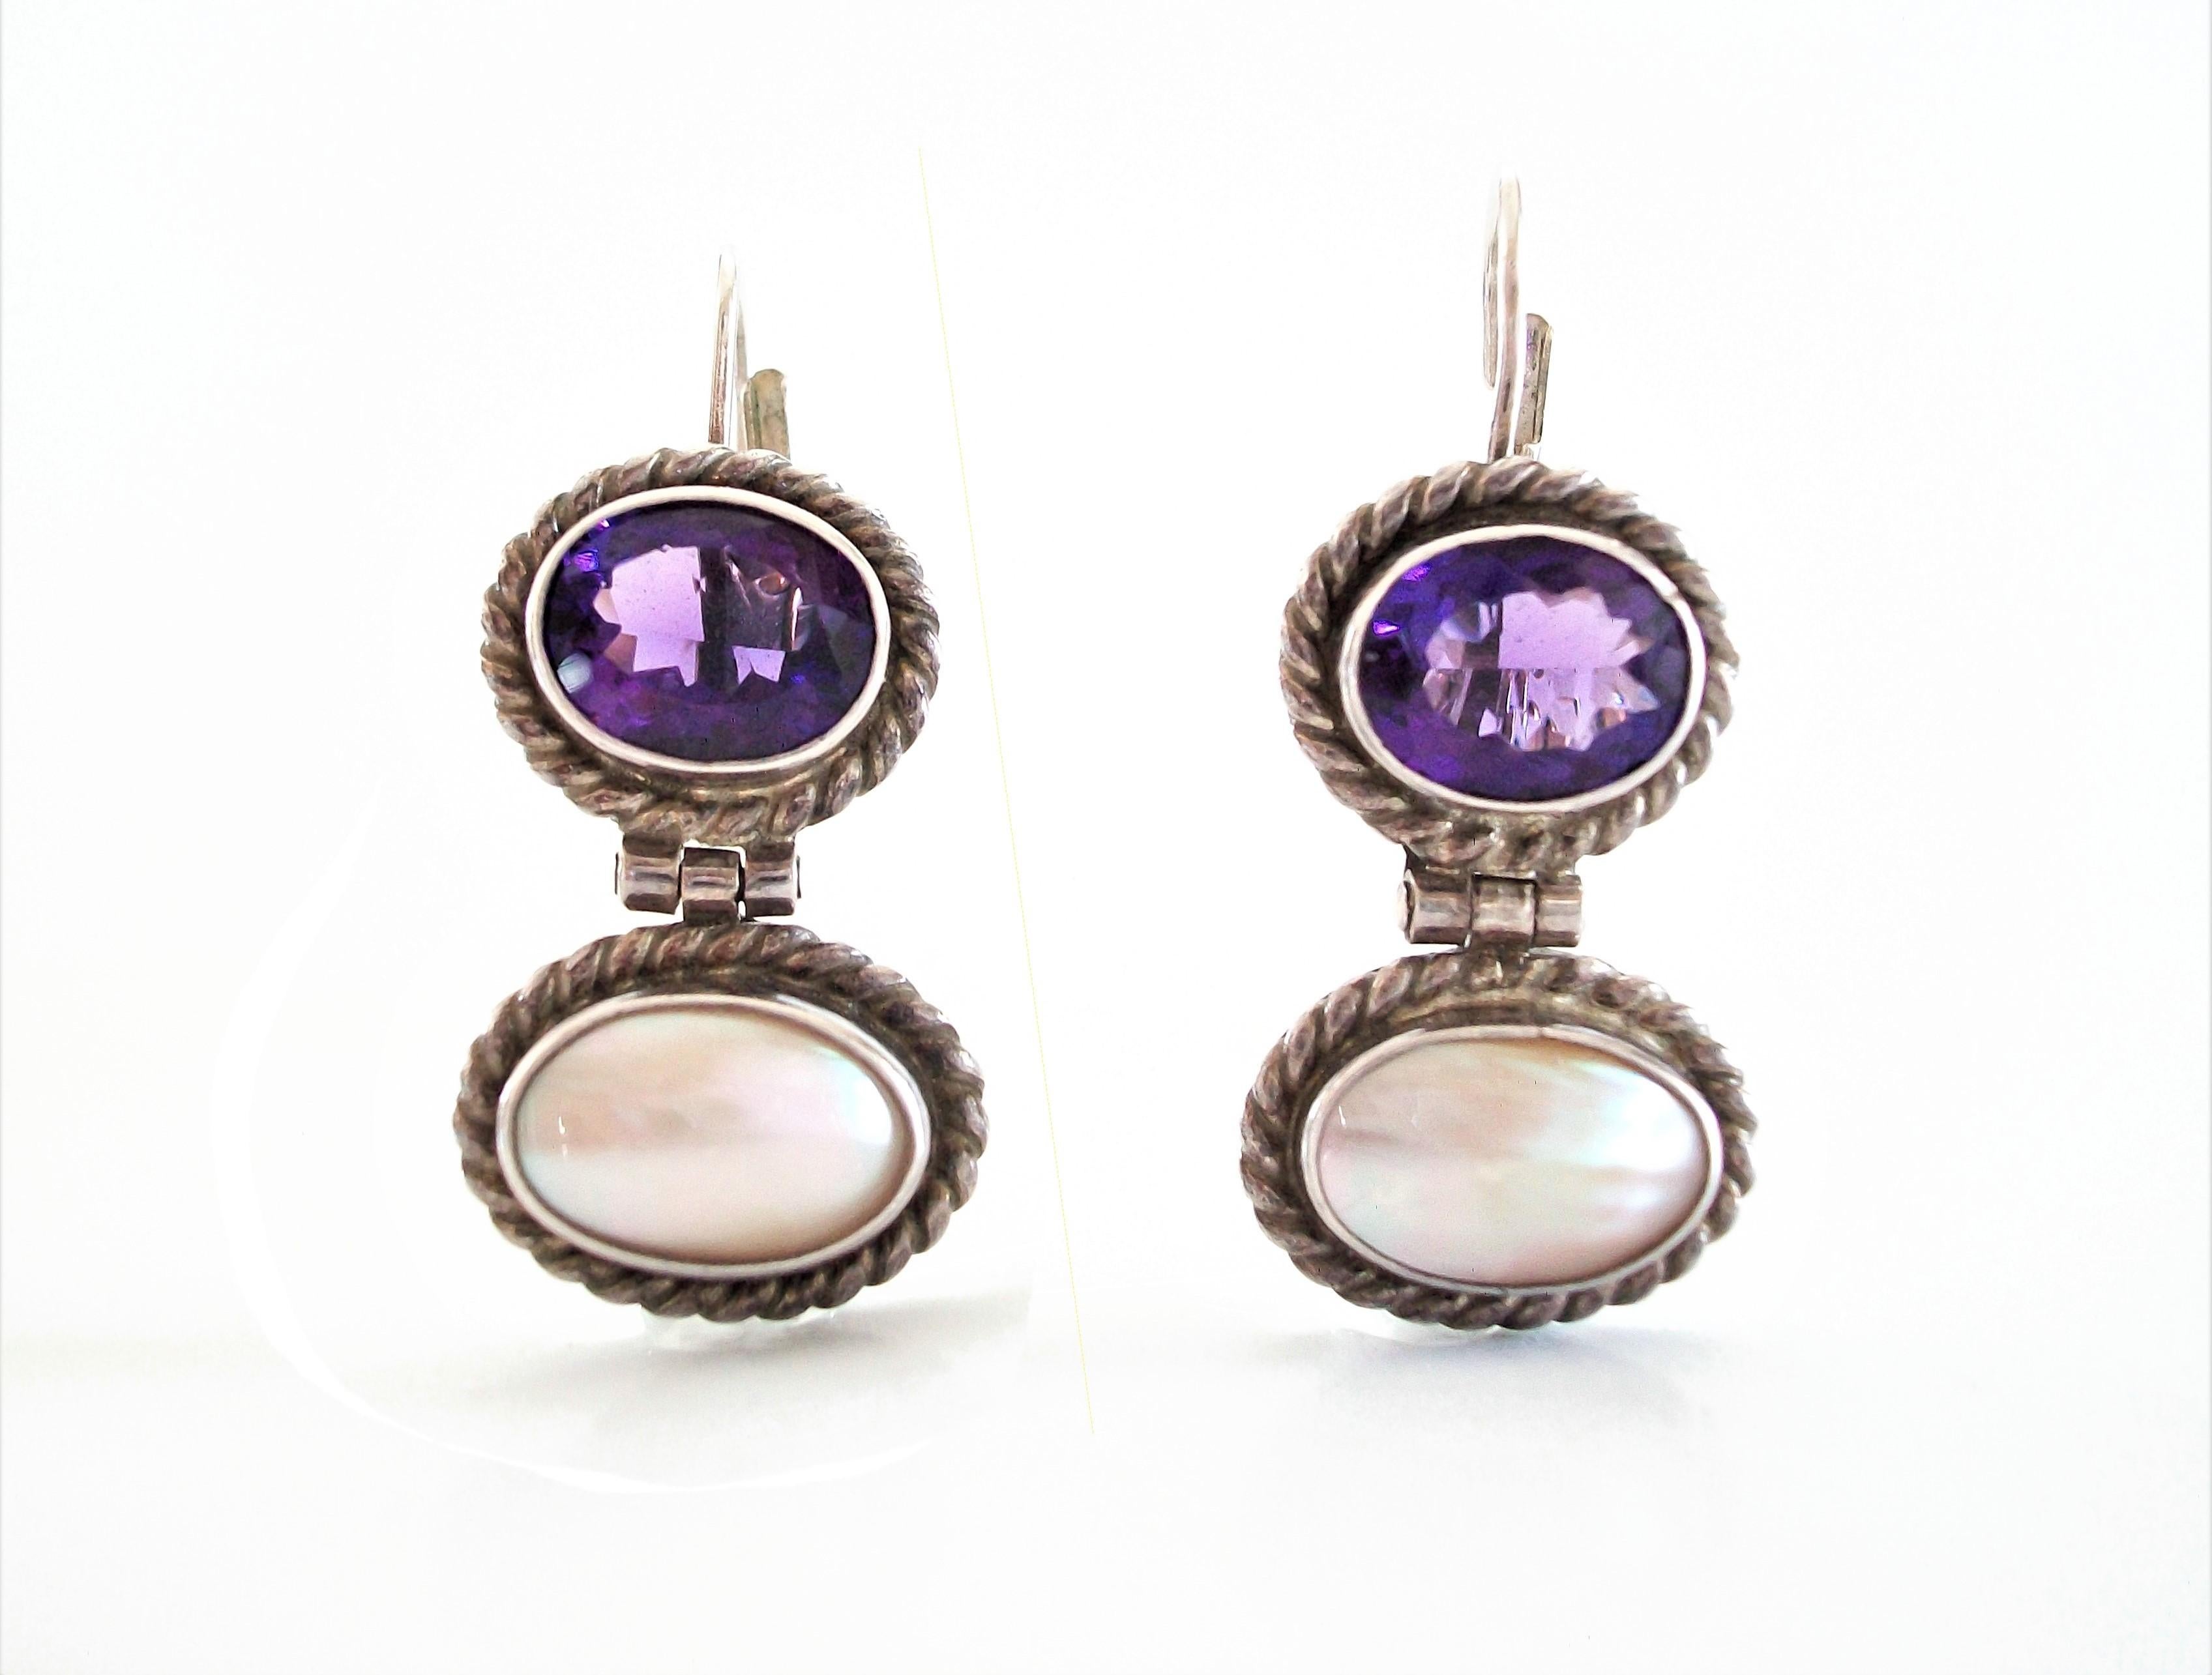 Sterling silver drop earrings for pierced ears - hand made - upper section of each earring bezel set with oval faceted purple Amethyst stones - lower sections with oval bezel set mother of pearl panels - rope twist details surround each section -